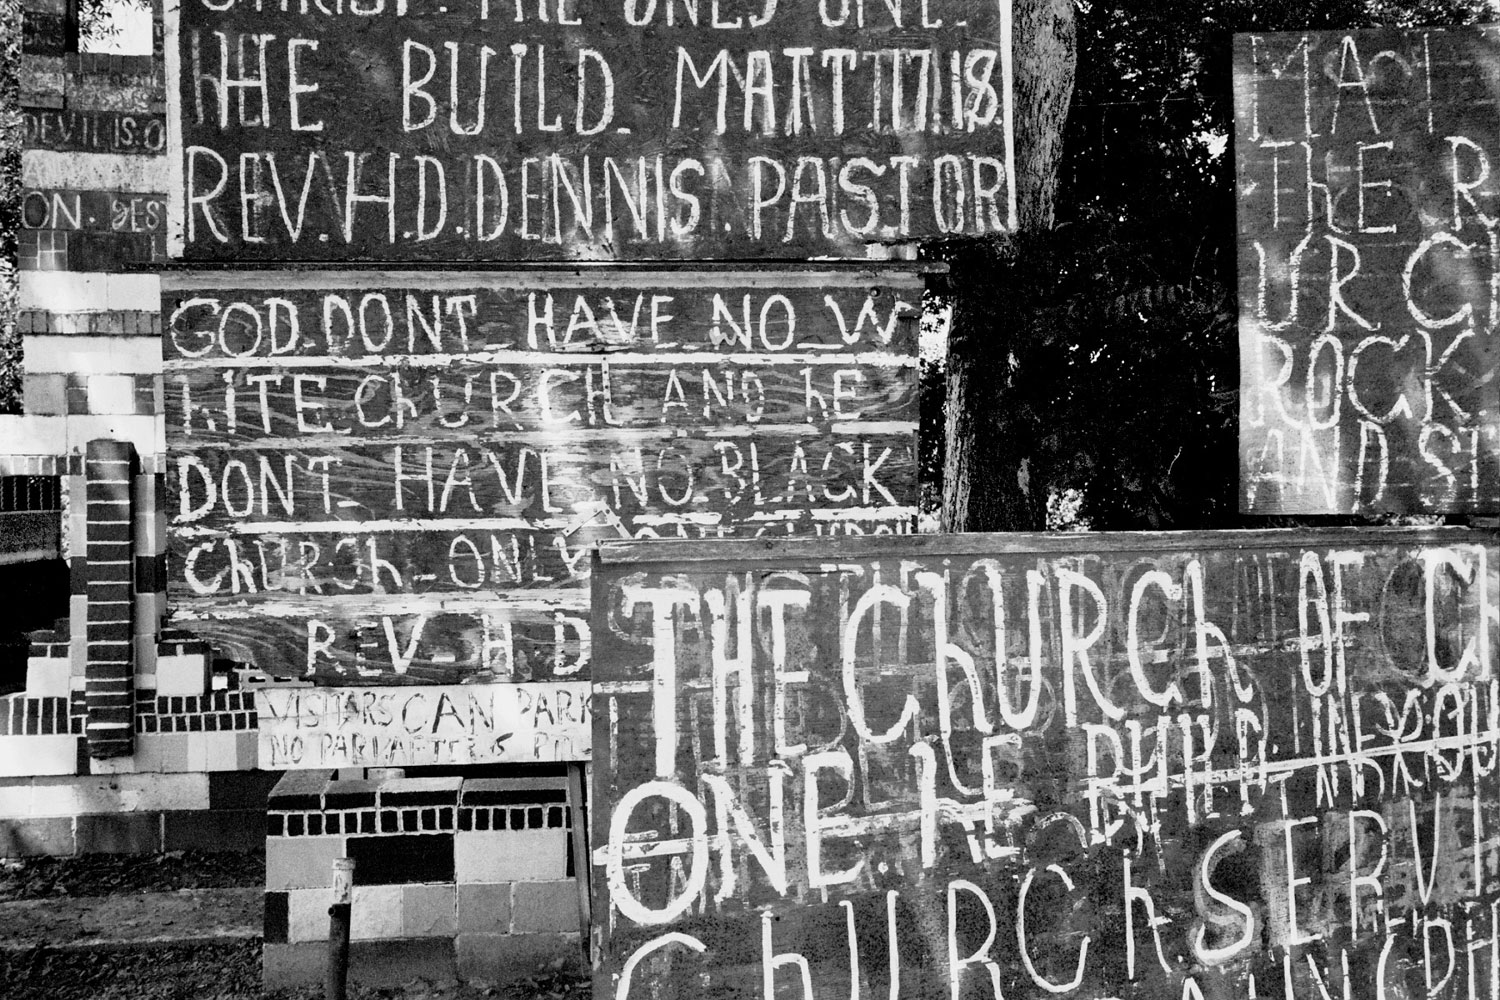 The Church of Christ and hand painted signs, in Vicksburg, Miss.